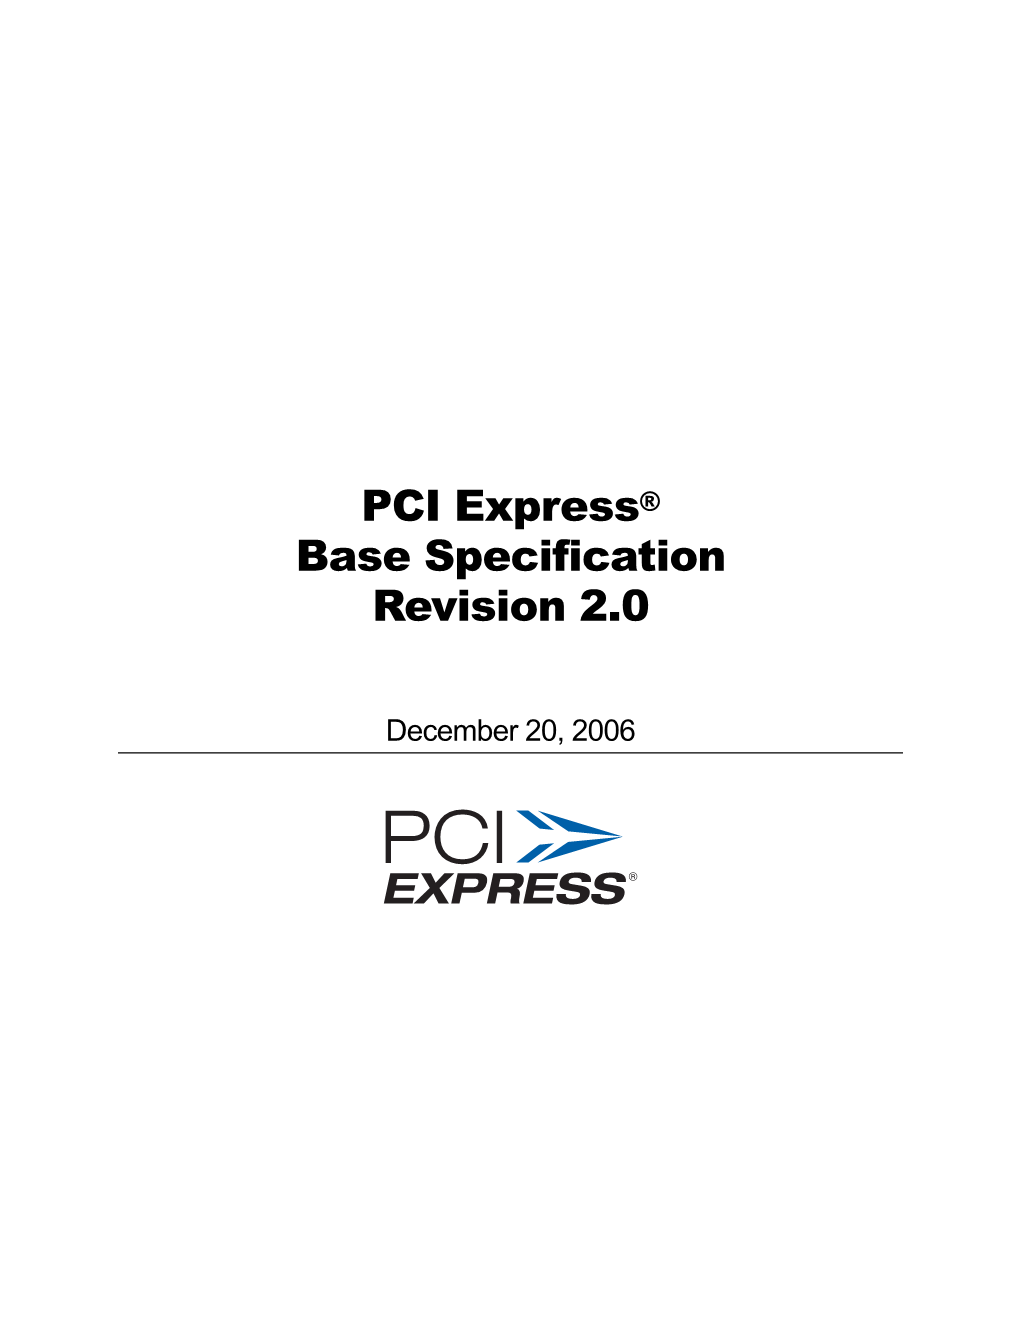 PCI Express® Base Specification Revision 2.0